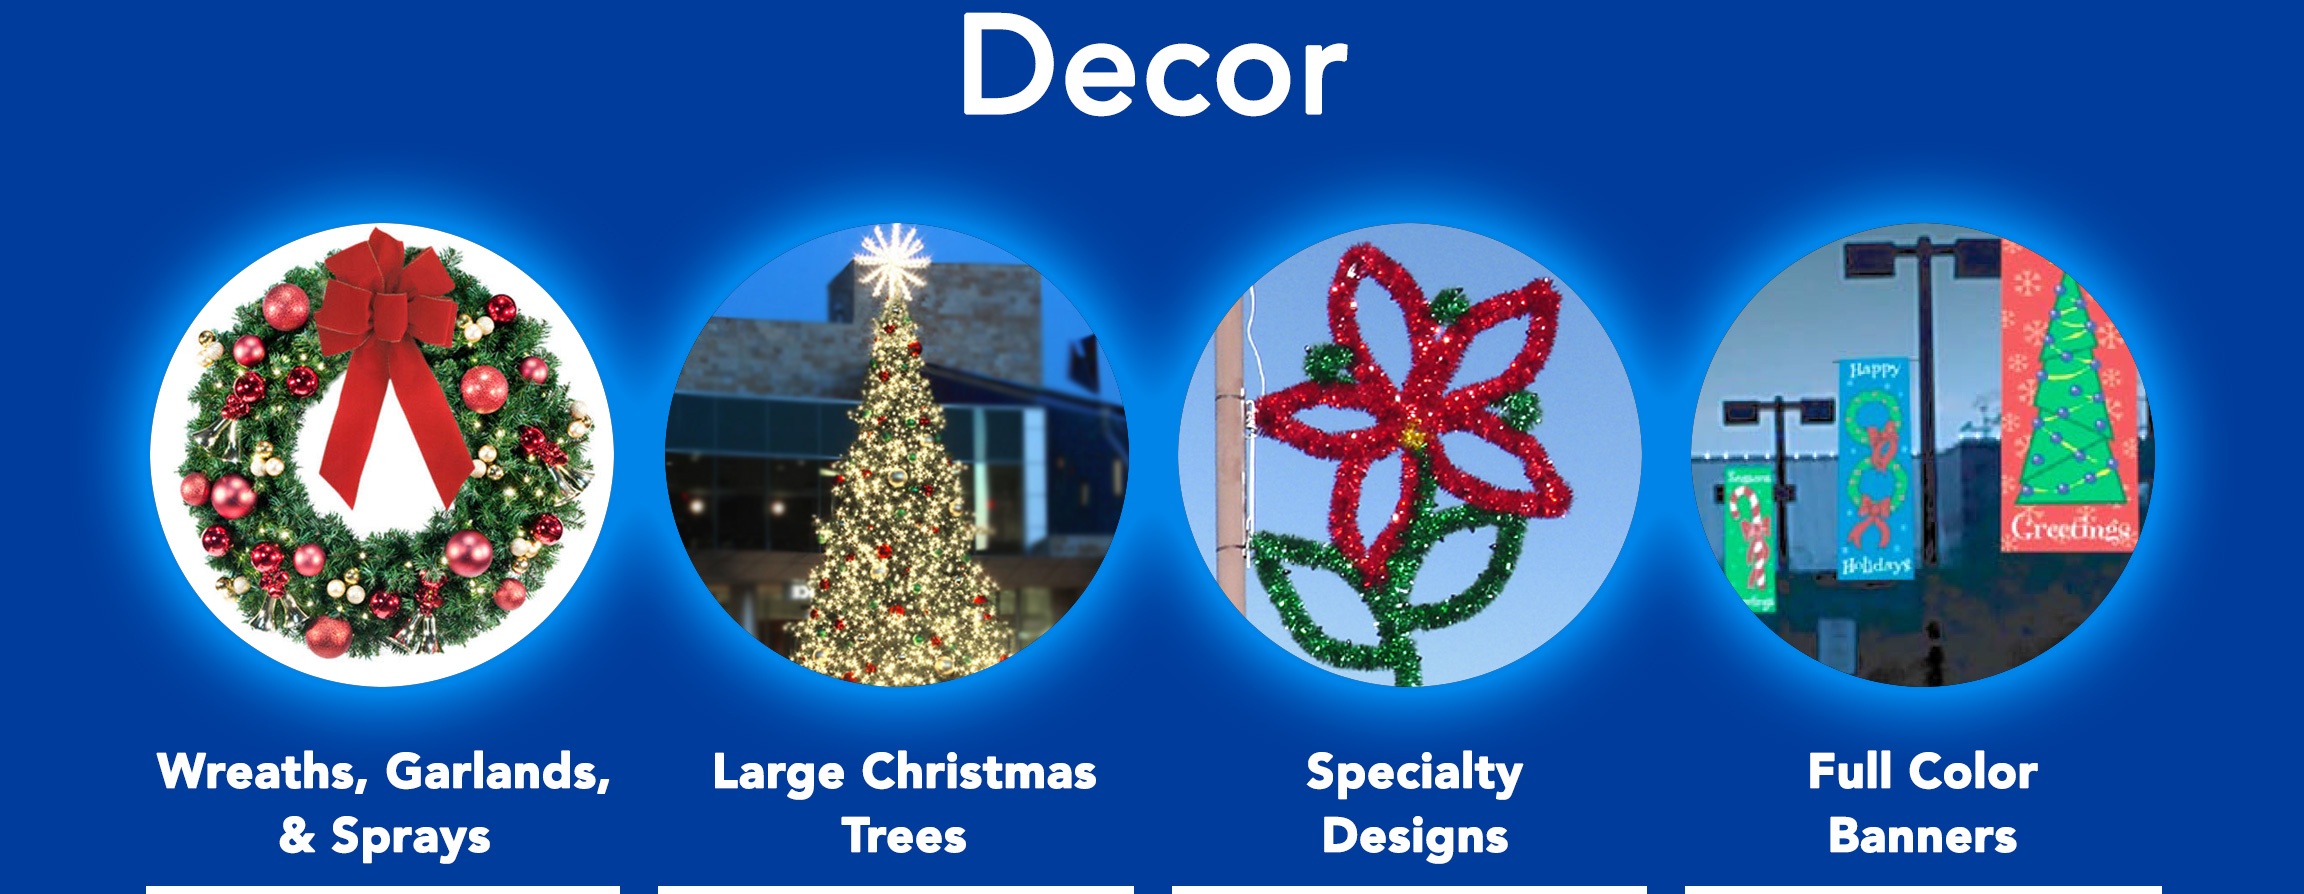 Wreaths, Garlands, & Sprays. Large Christmas Trees. Specialty Lighted & Garland Designs. Full color pole mounted holiday banners.